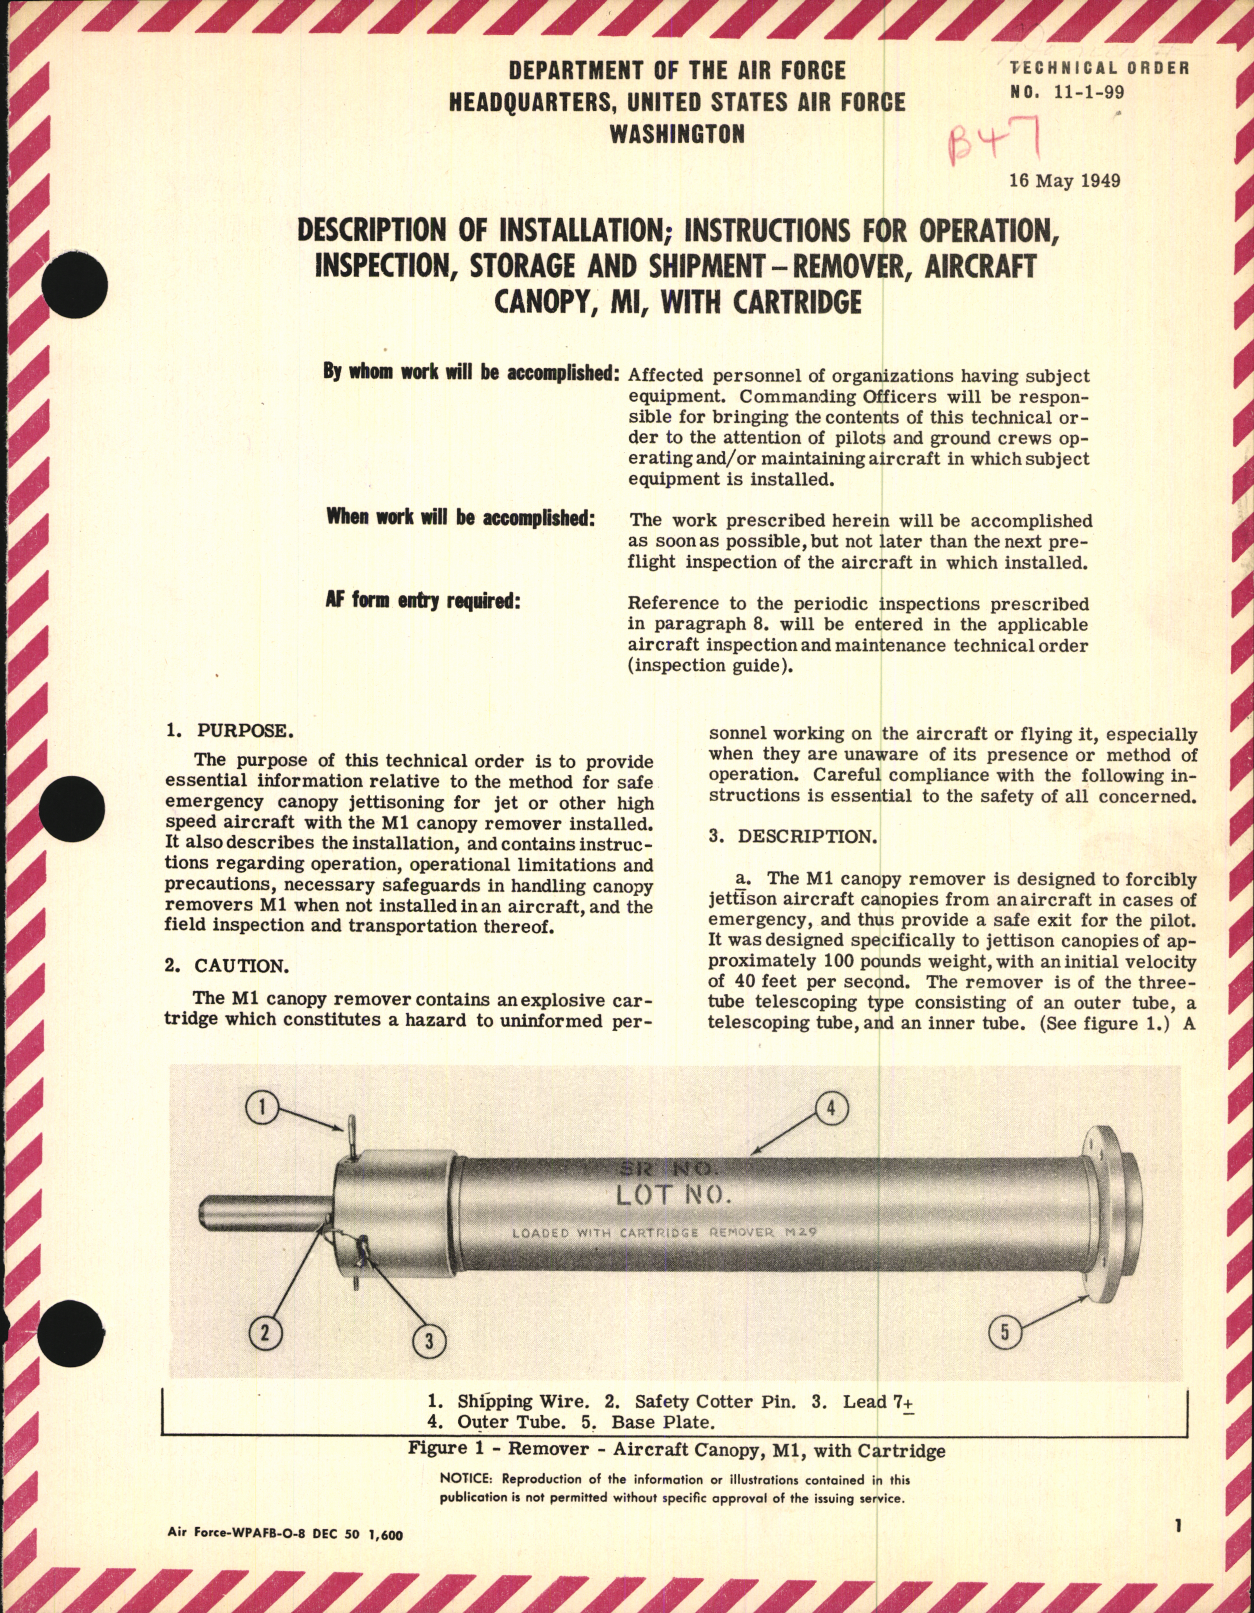 Sample page 1 from AirCorps Library document: Instructions for Operation, Inspection, Storage, & Shipment for Aircraft Canopy Remover M1 With Cartridge